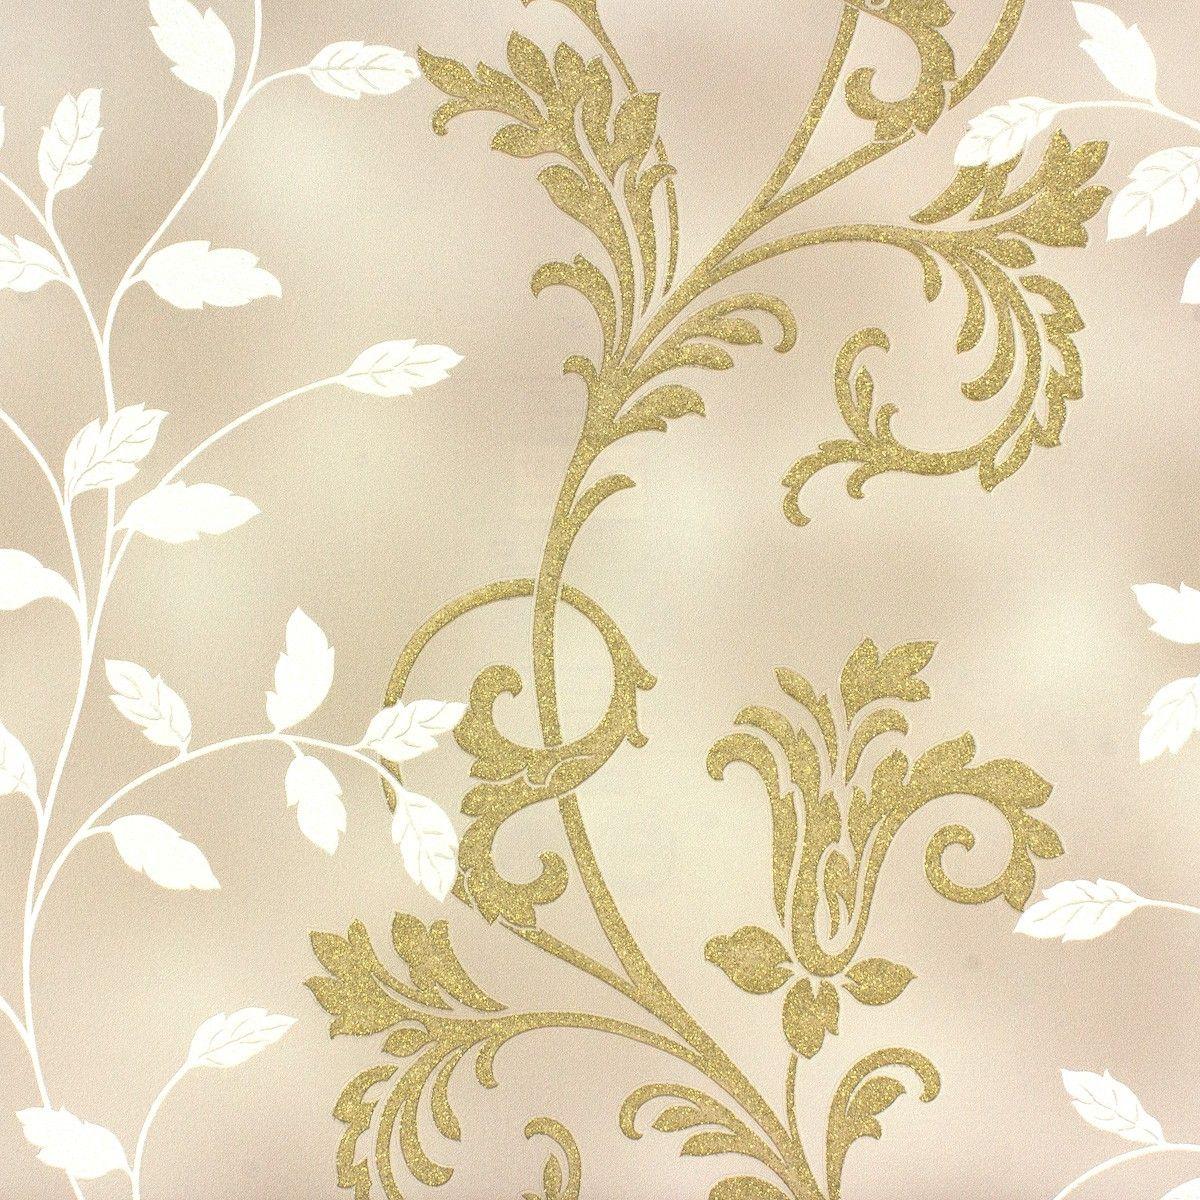 Cream And Gold Wallpaper, Full HD 1080p, Best HD Cream And Gold